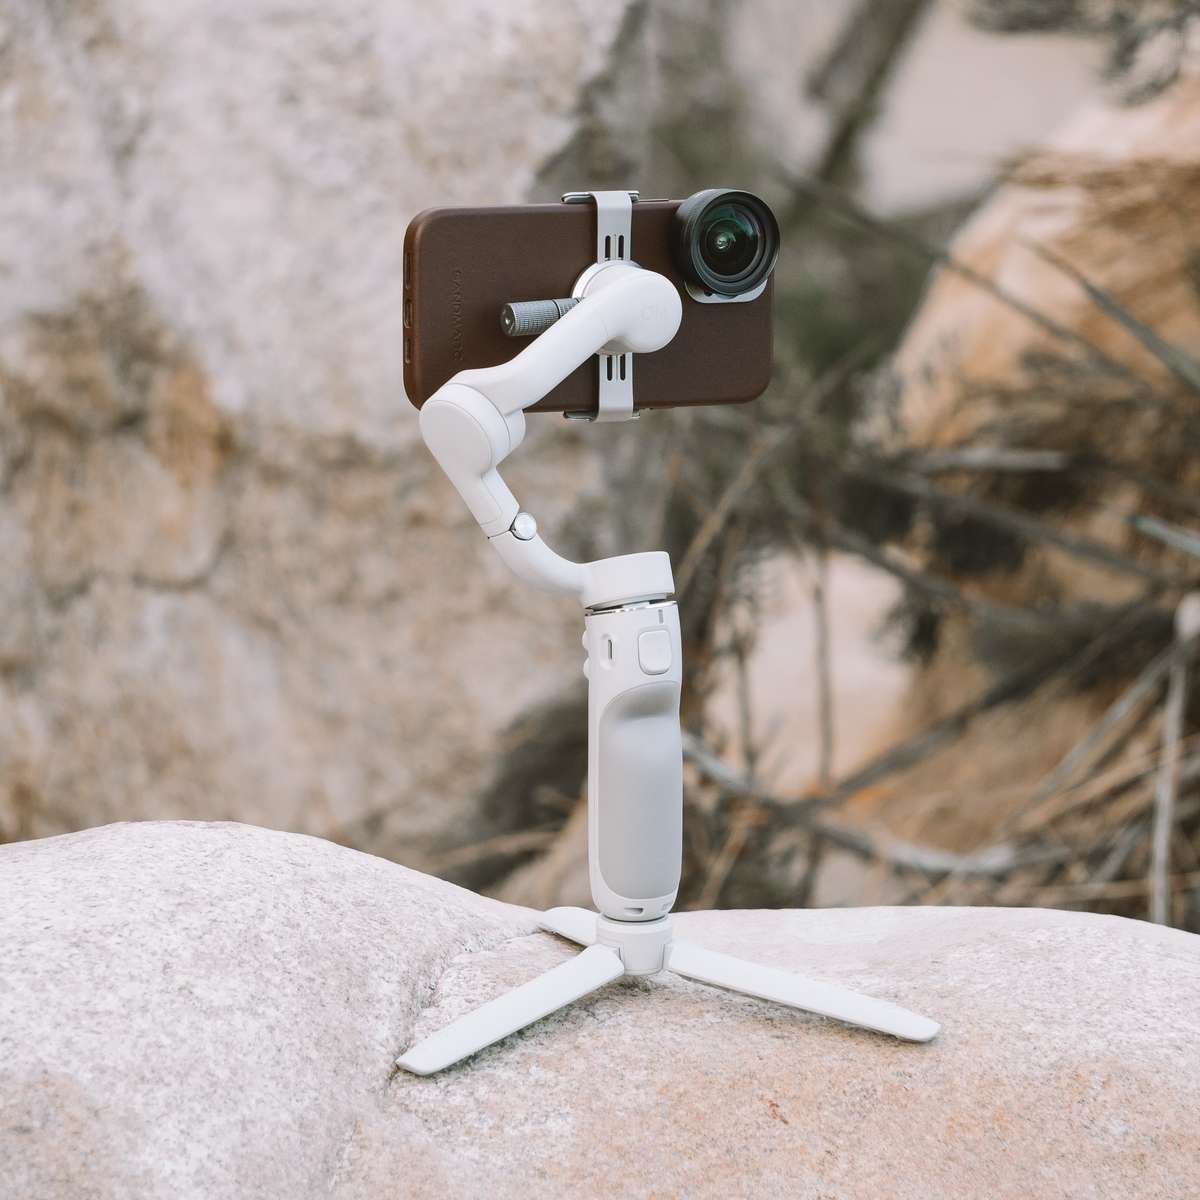 Counterweight - Osmo Mobile 6 / OM5 / OM4 / Osmo 3